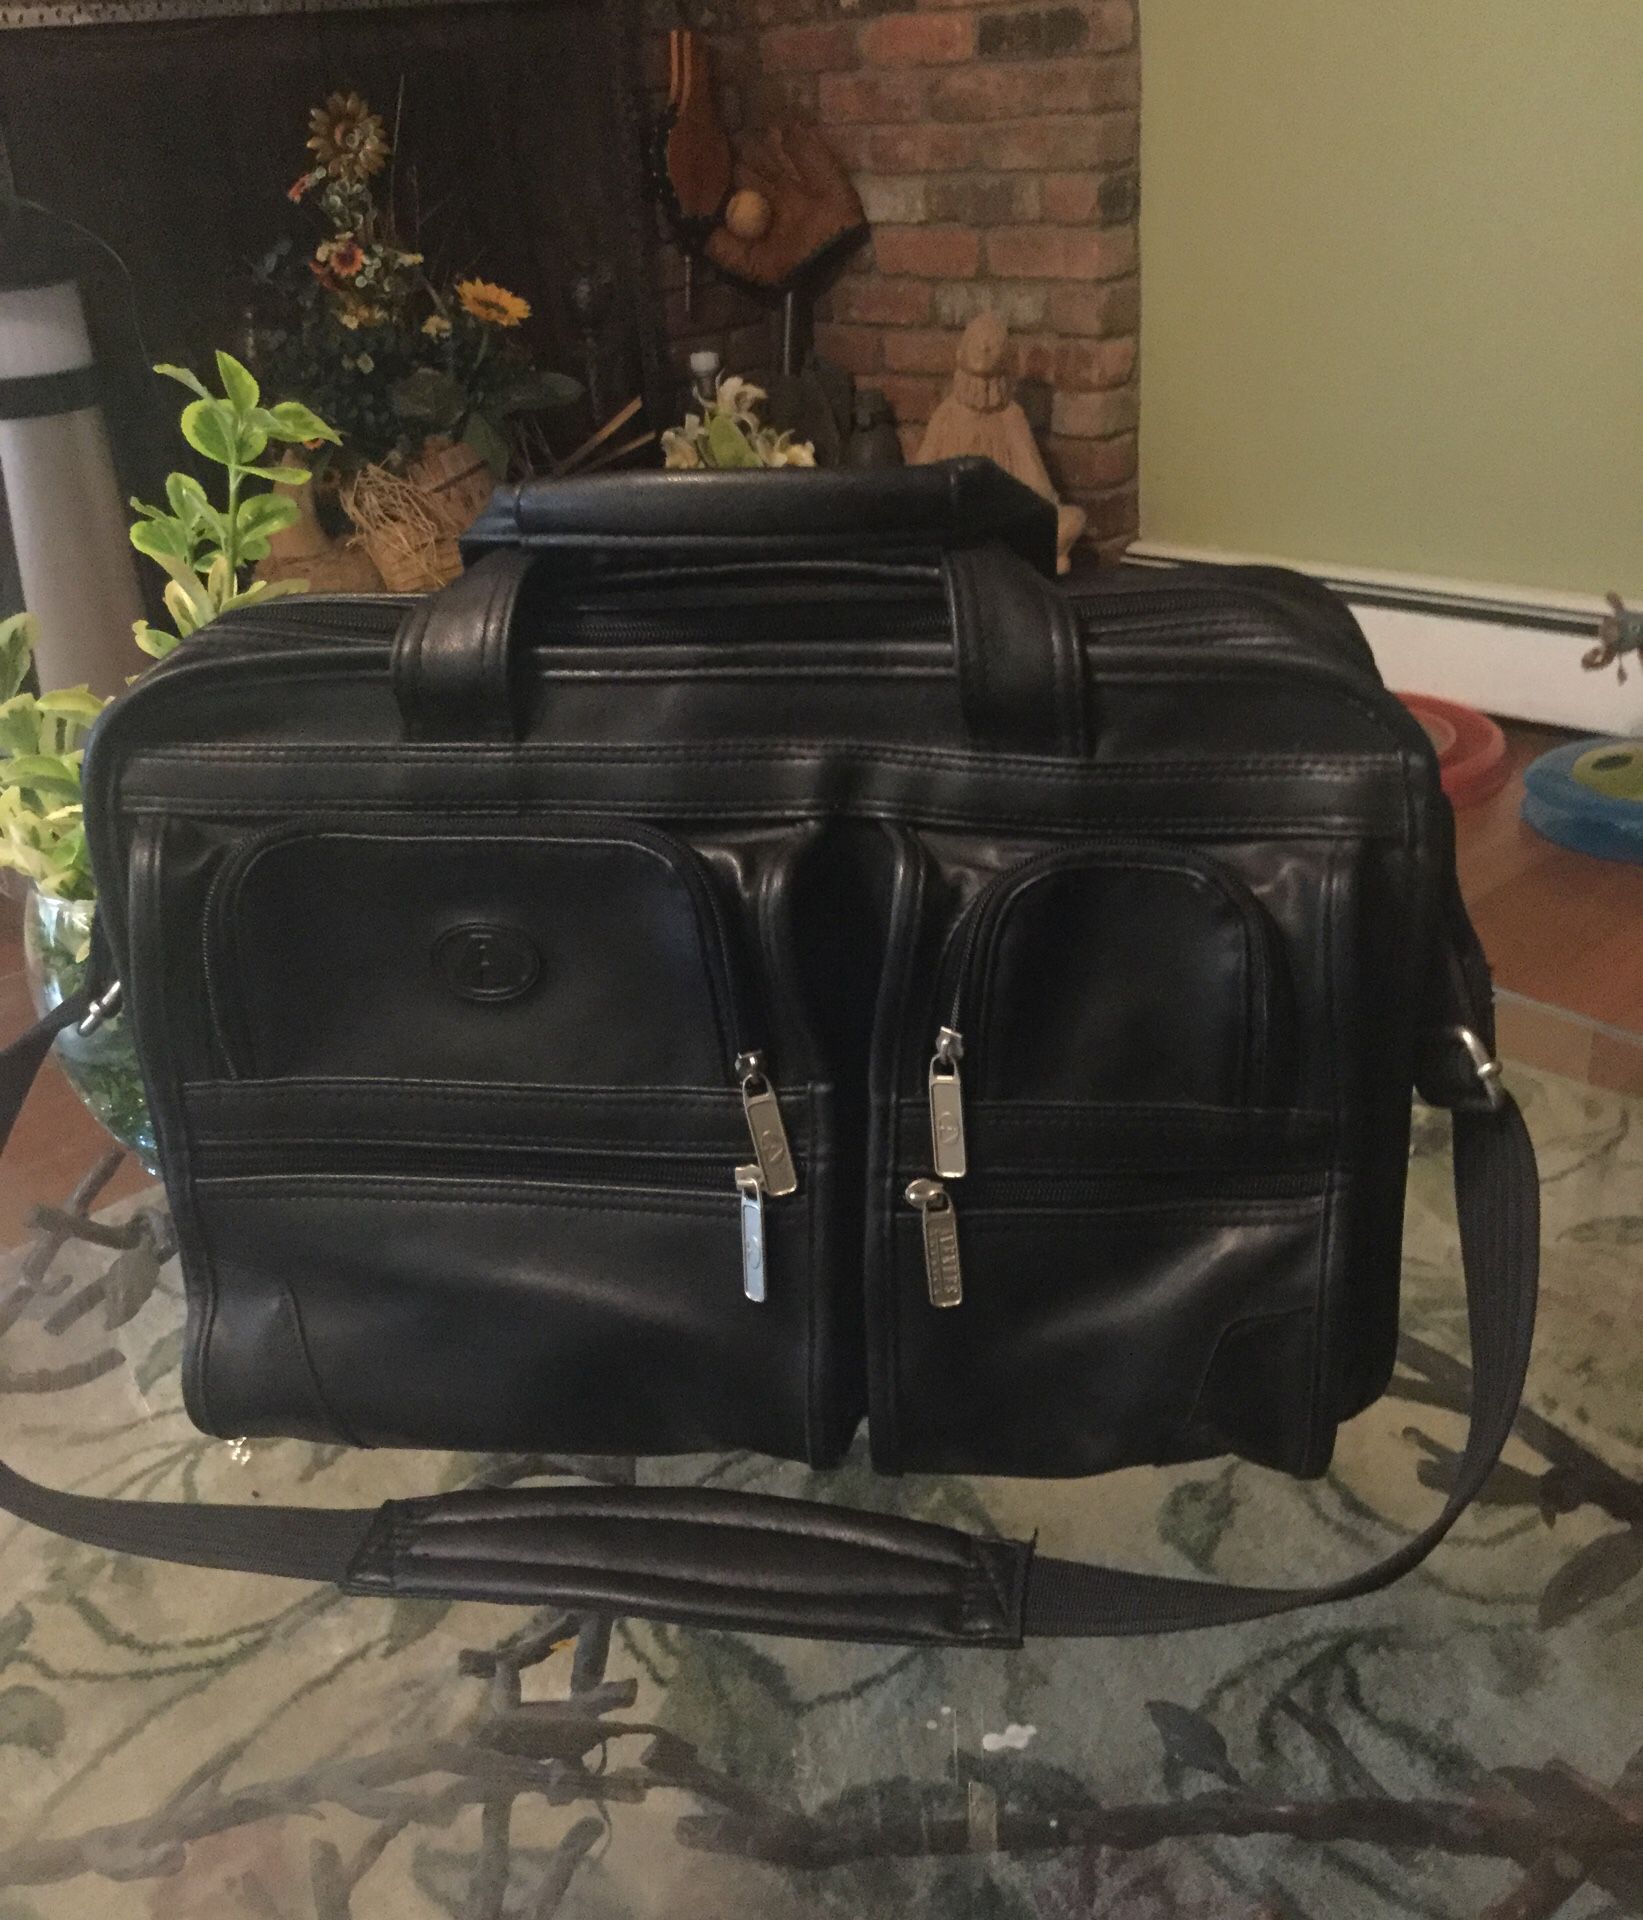 Black Leather Laptop Bag for Sale in New Rochelle, NY - OfferUp